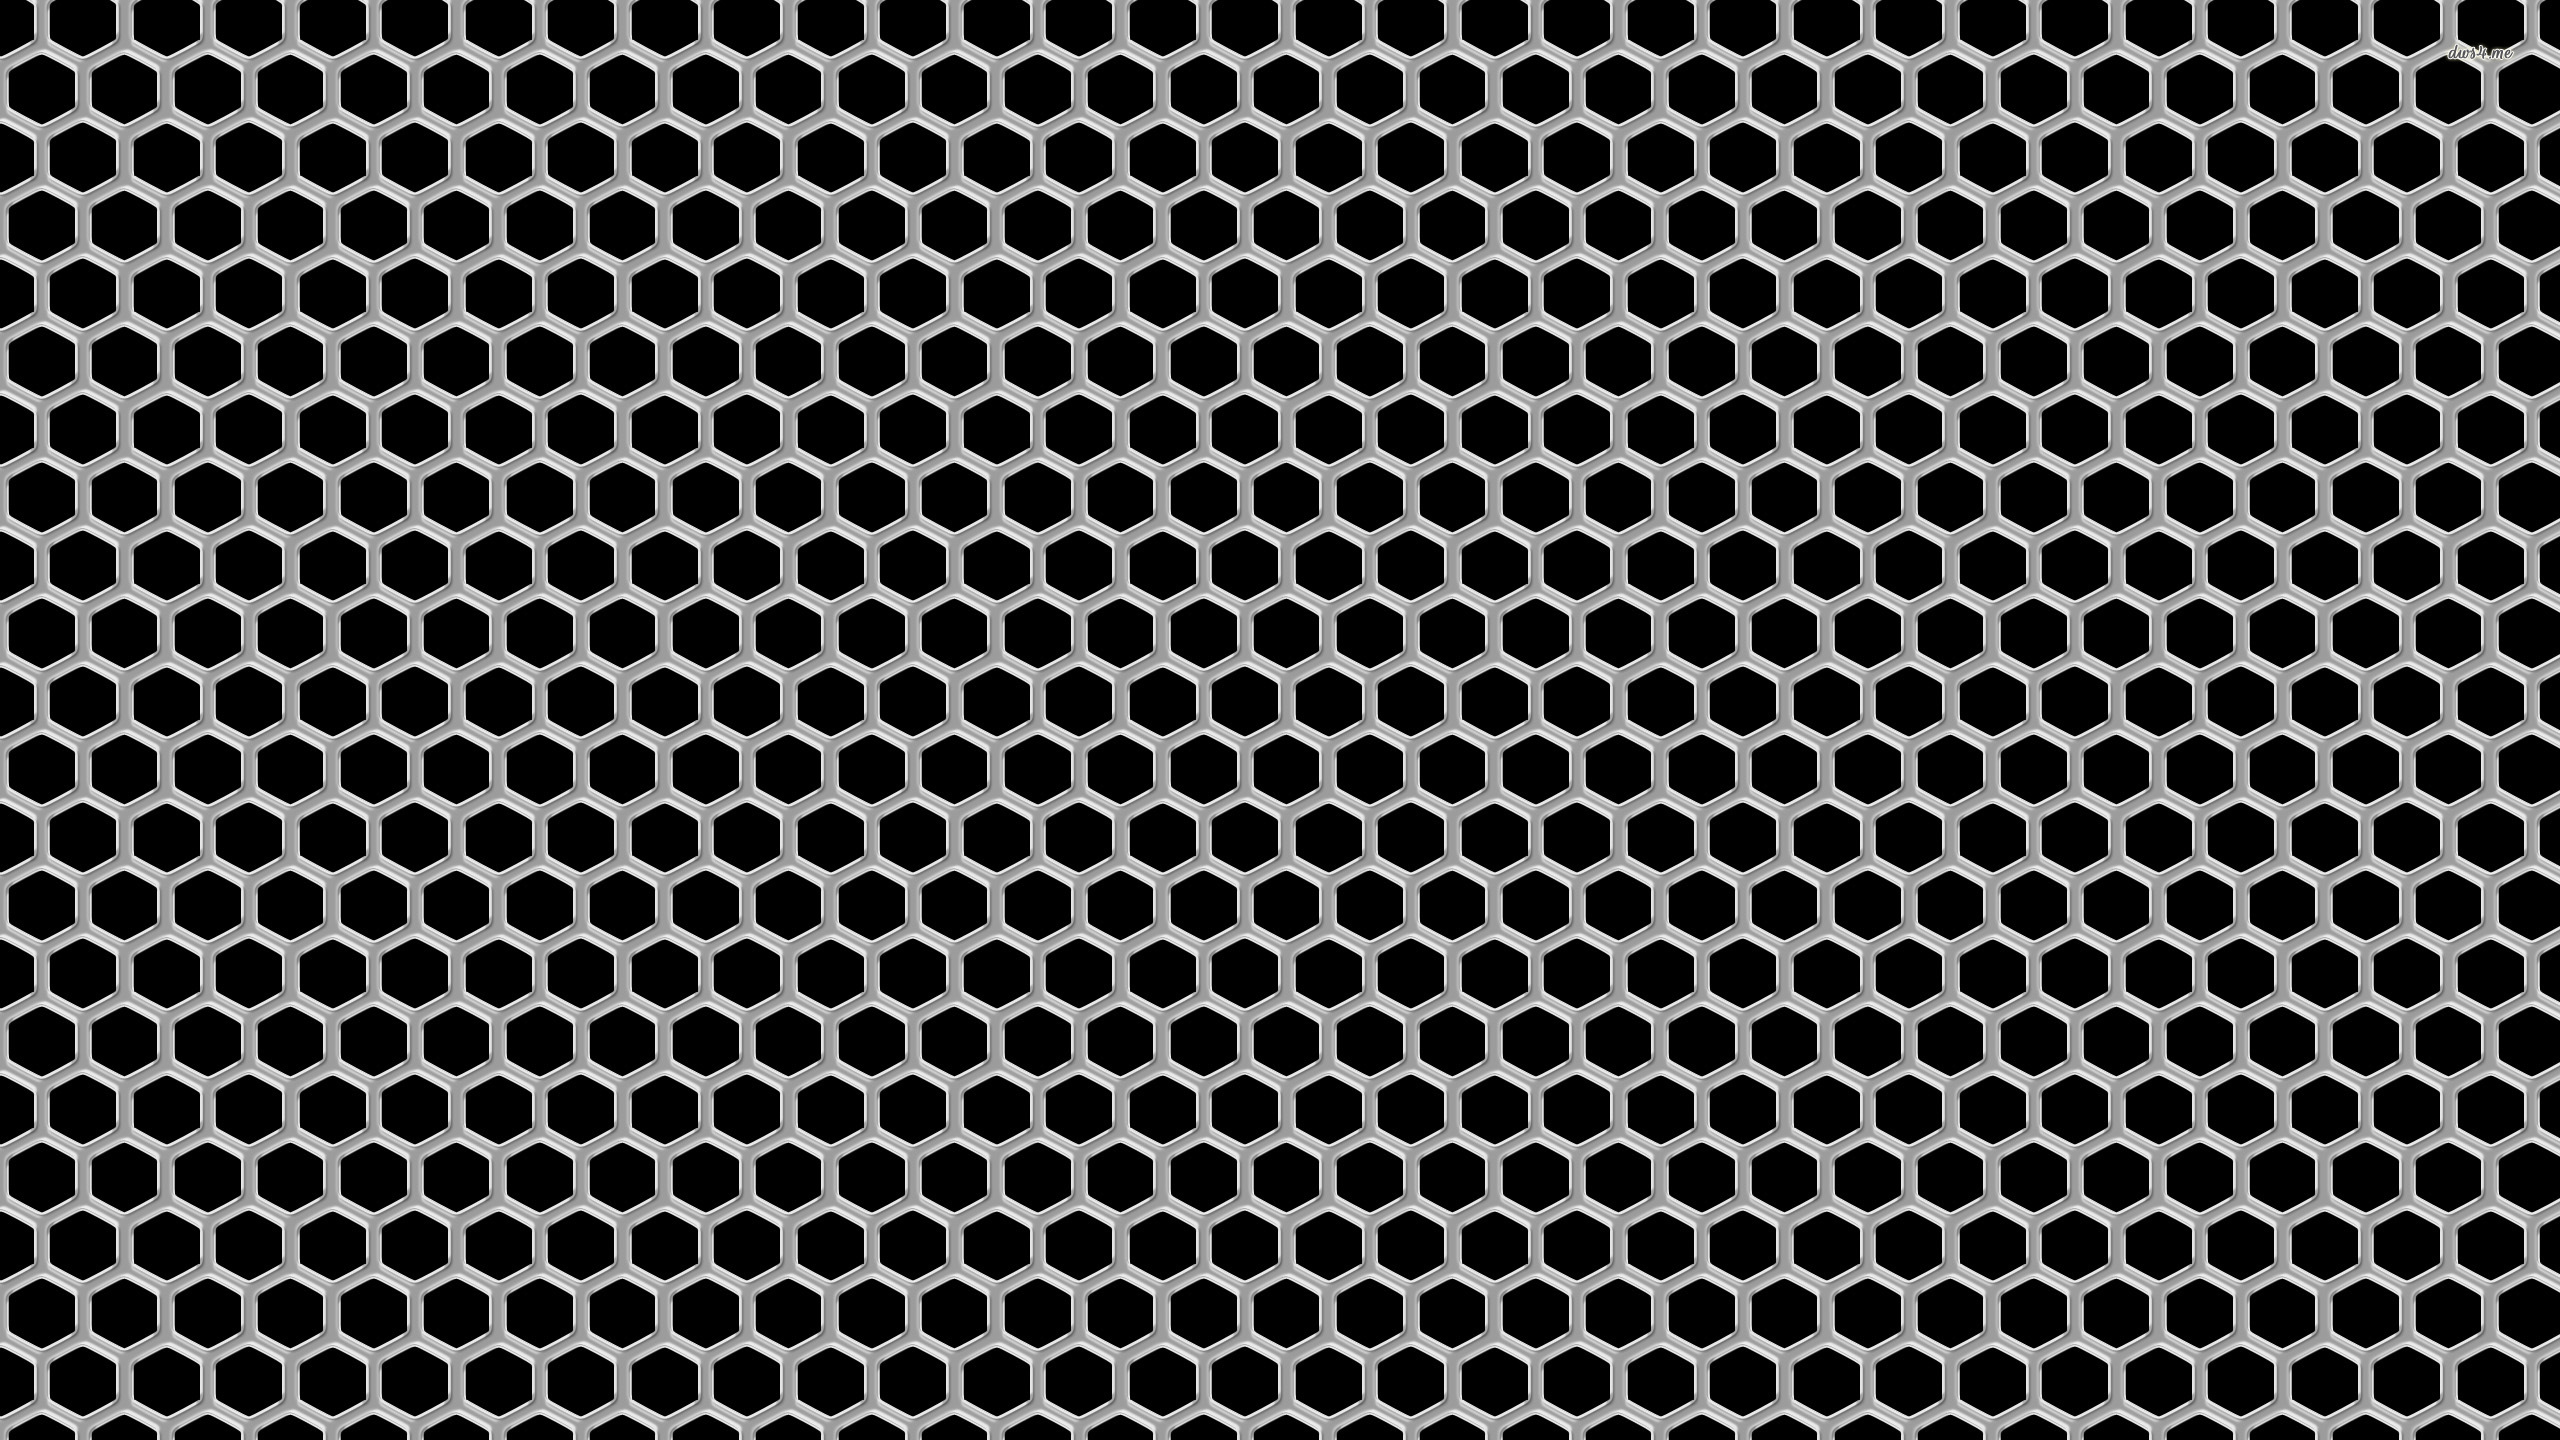 Honeycomb pattern wallpaper - Abstract wallpapers - #39092